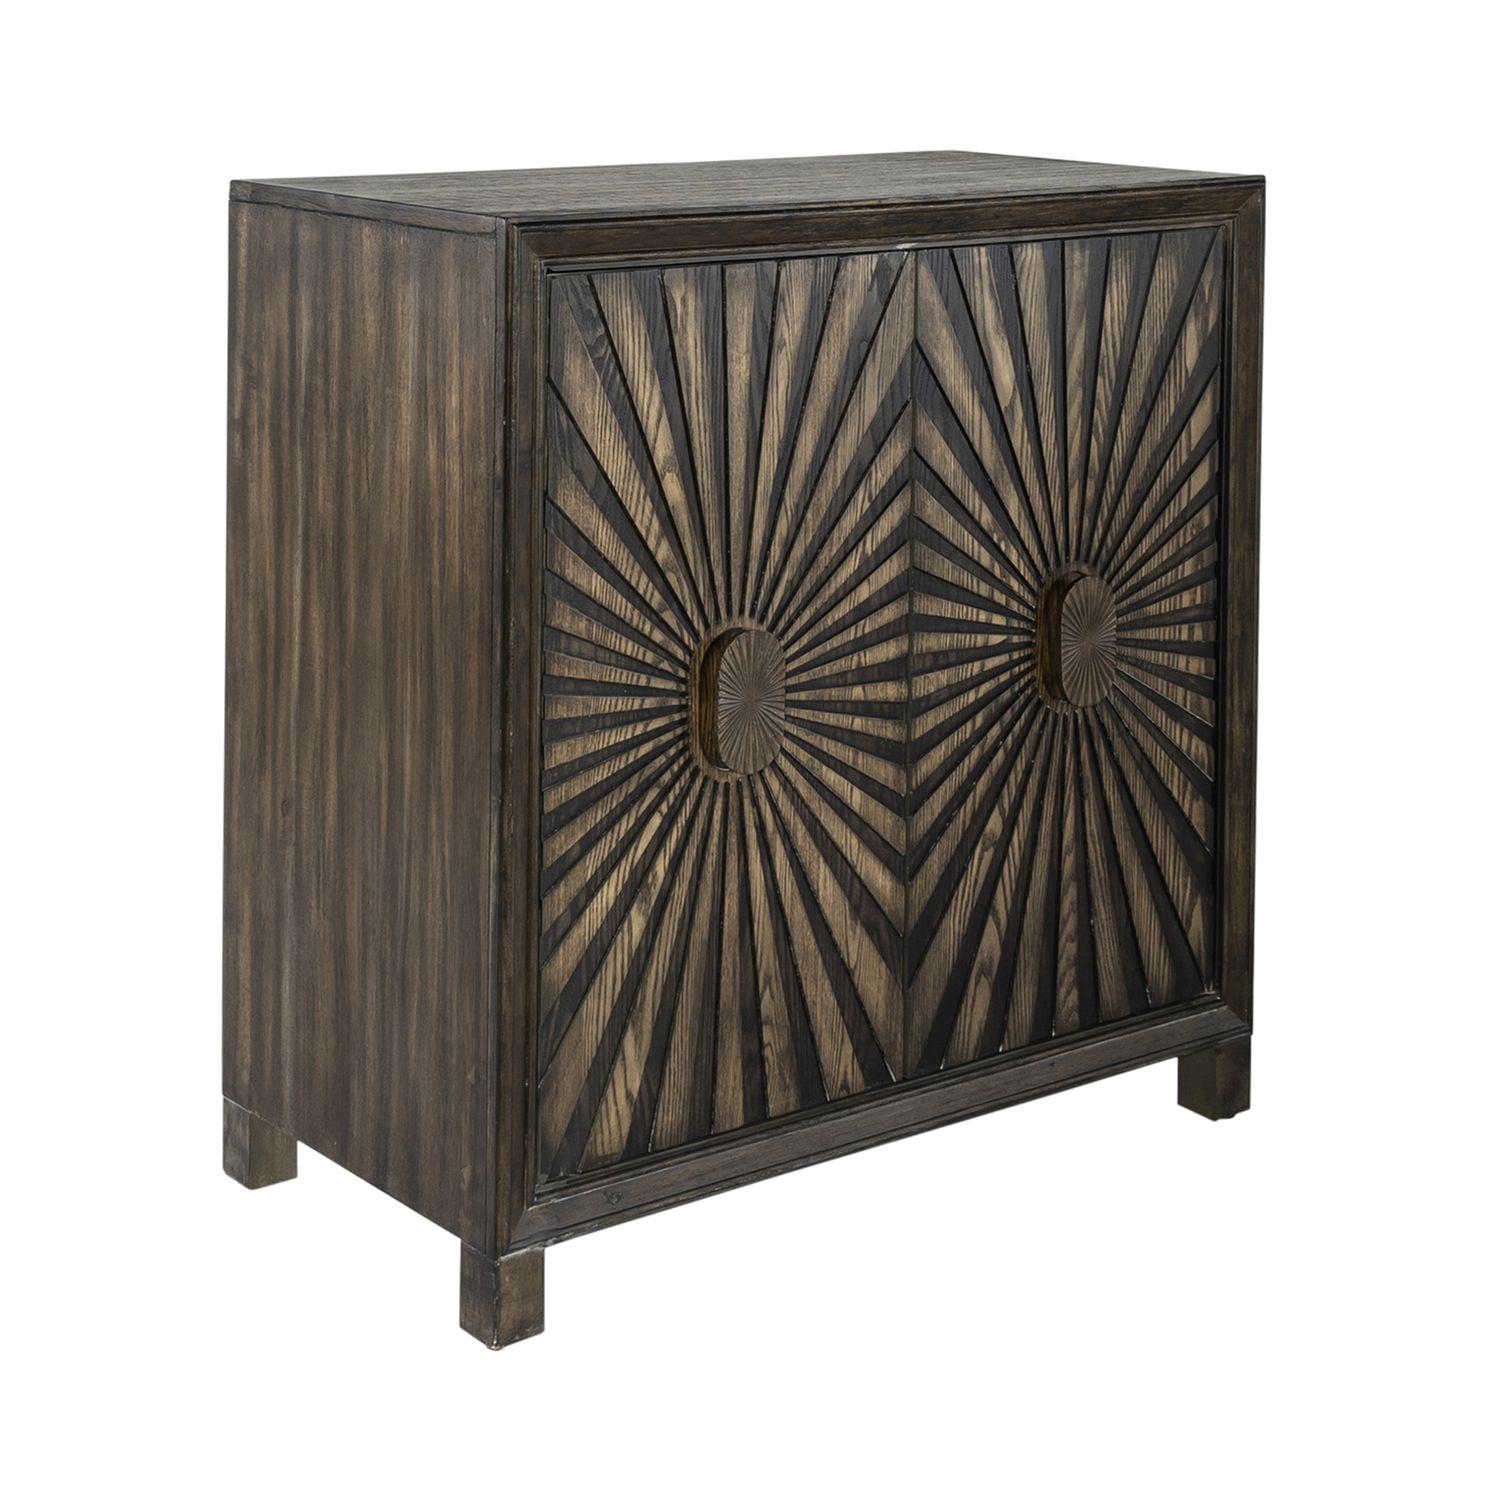   Chaucer  (2041-AC) Accent Cabinet  